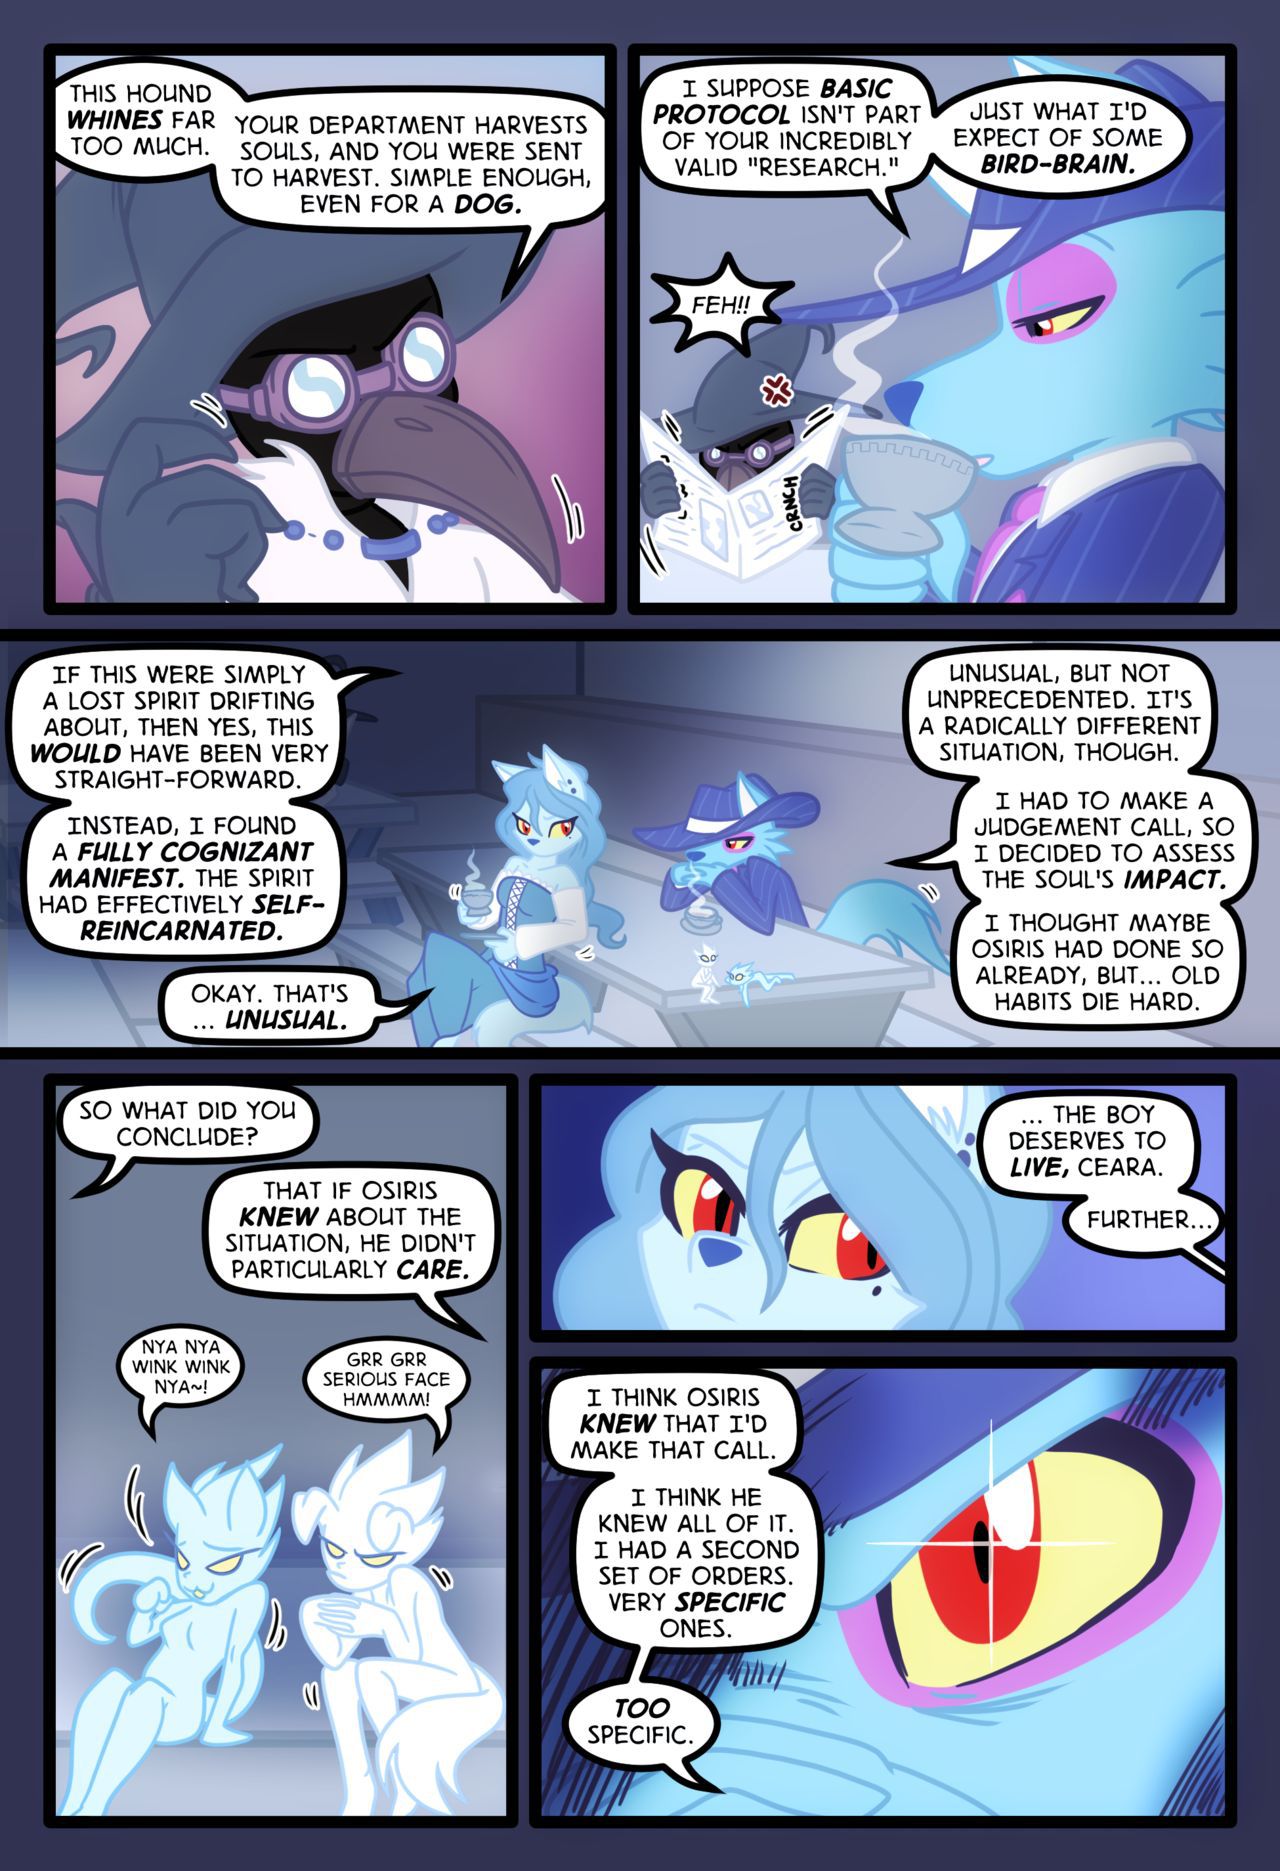 [Zaron] Lonely Hooves (My Little Pony Friendship Is Magic) [Ongoing] 219